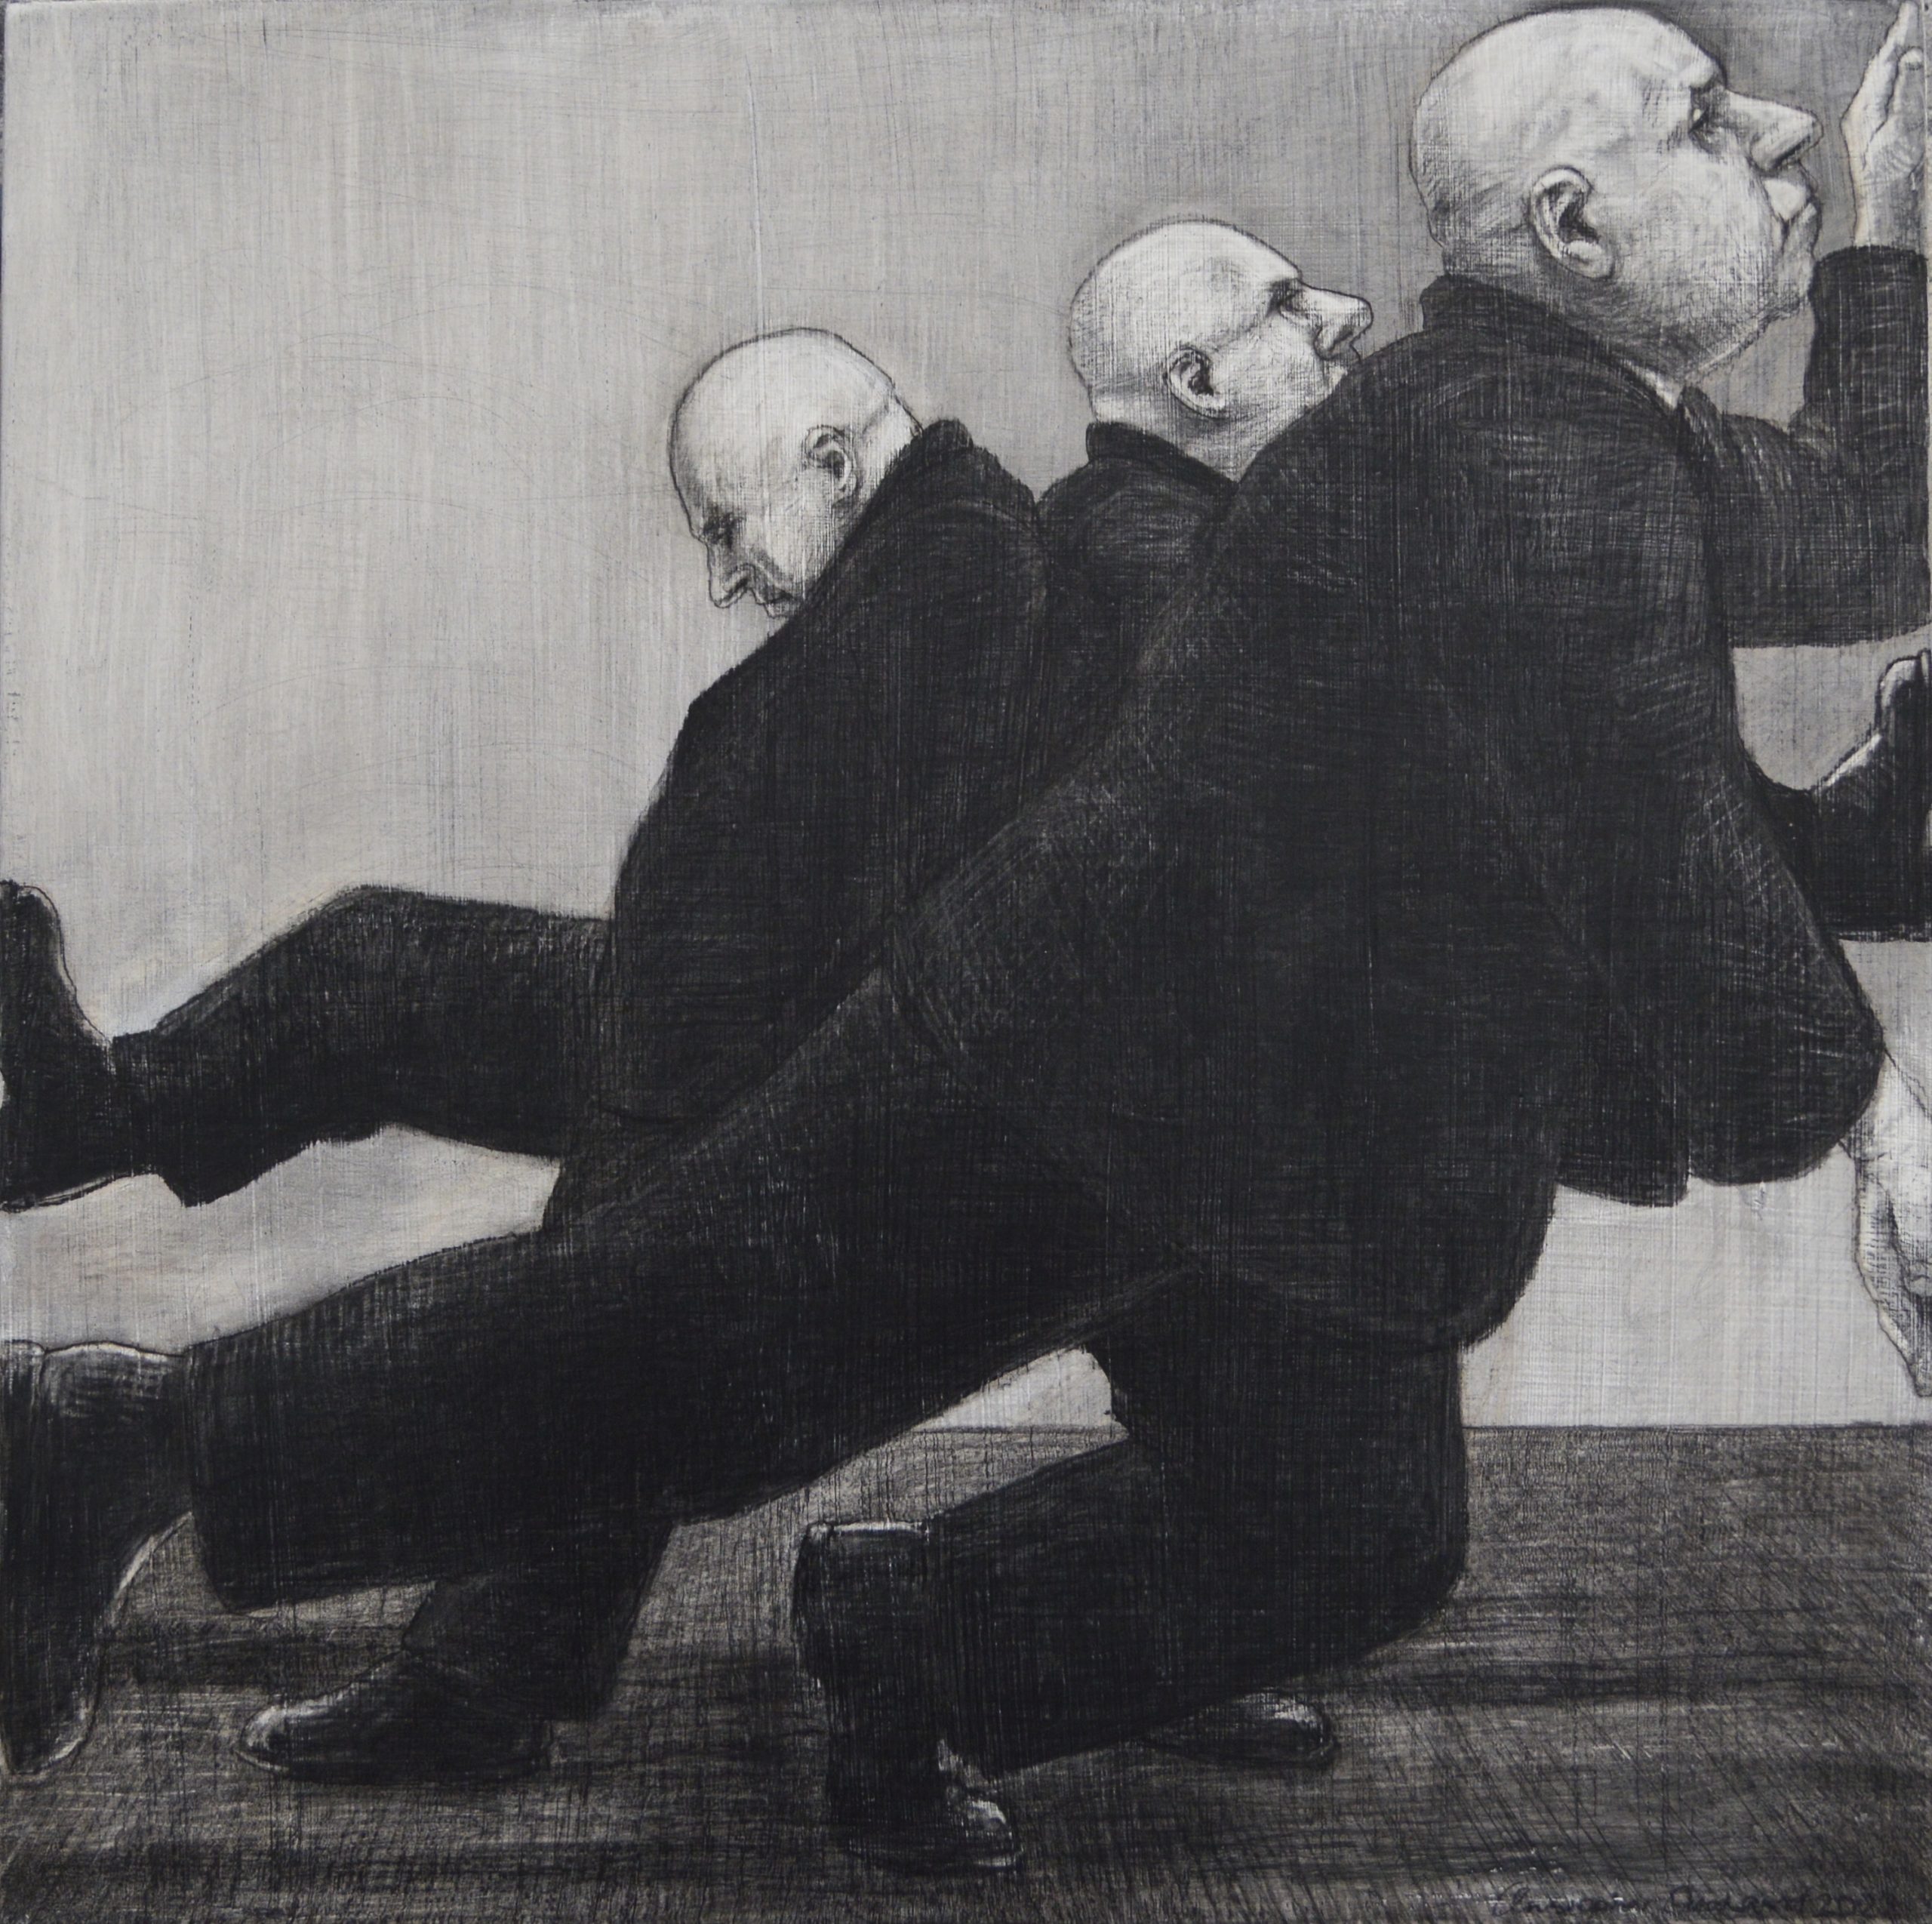 Christopher Orchard 'Push' Charcoal on gesso on wood panel 40x40cm SOLD